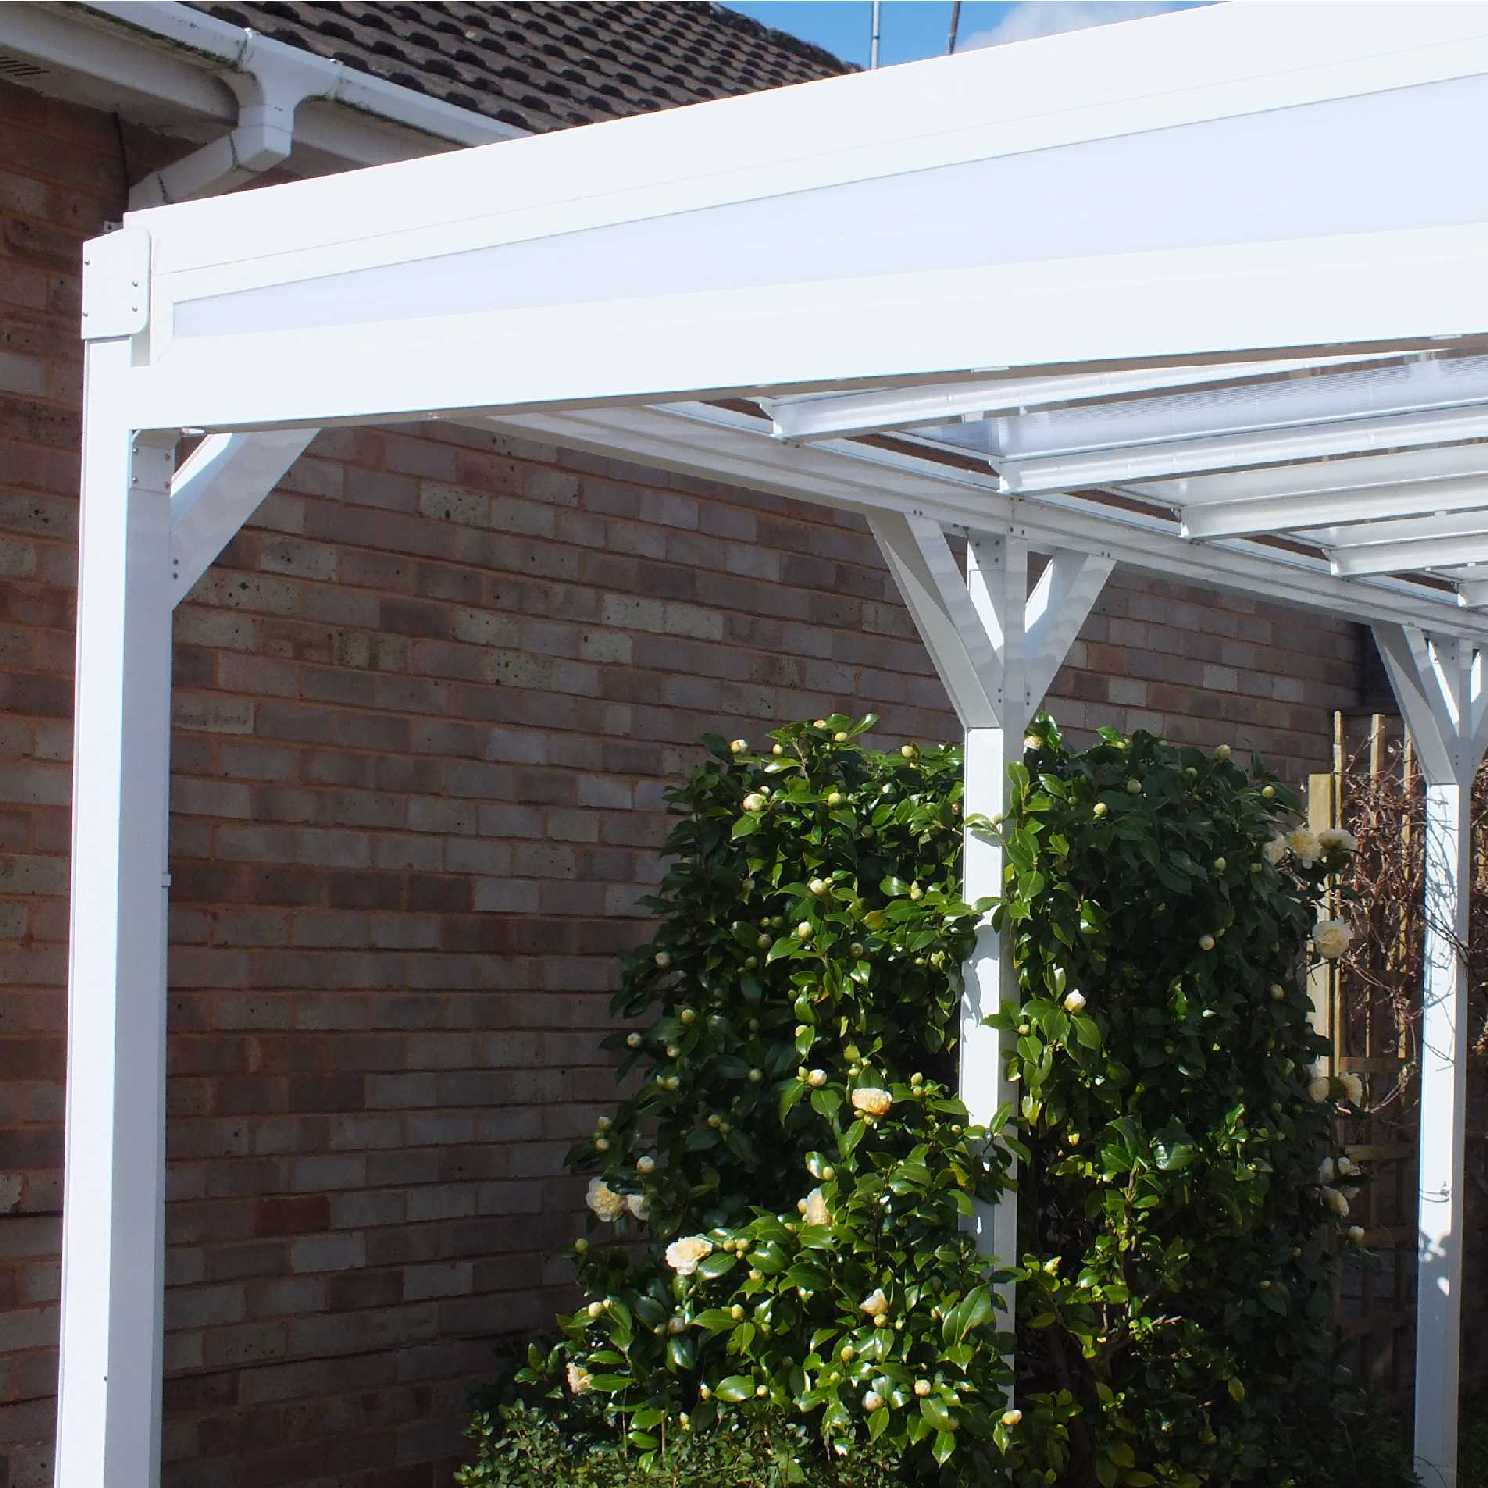 Omega Smart Lean-To Canopy, White with 16mm Polycarbonate Glazing - 2.1m (W) x 1.5m (P), (2) Supporting Posts from Omega Build